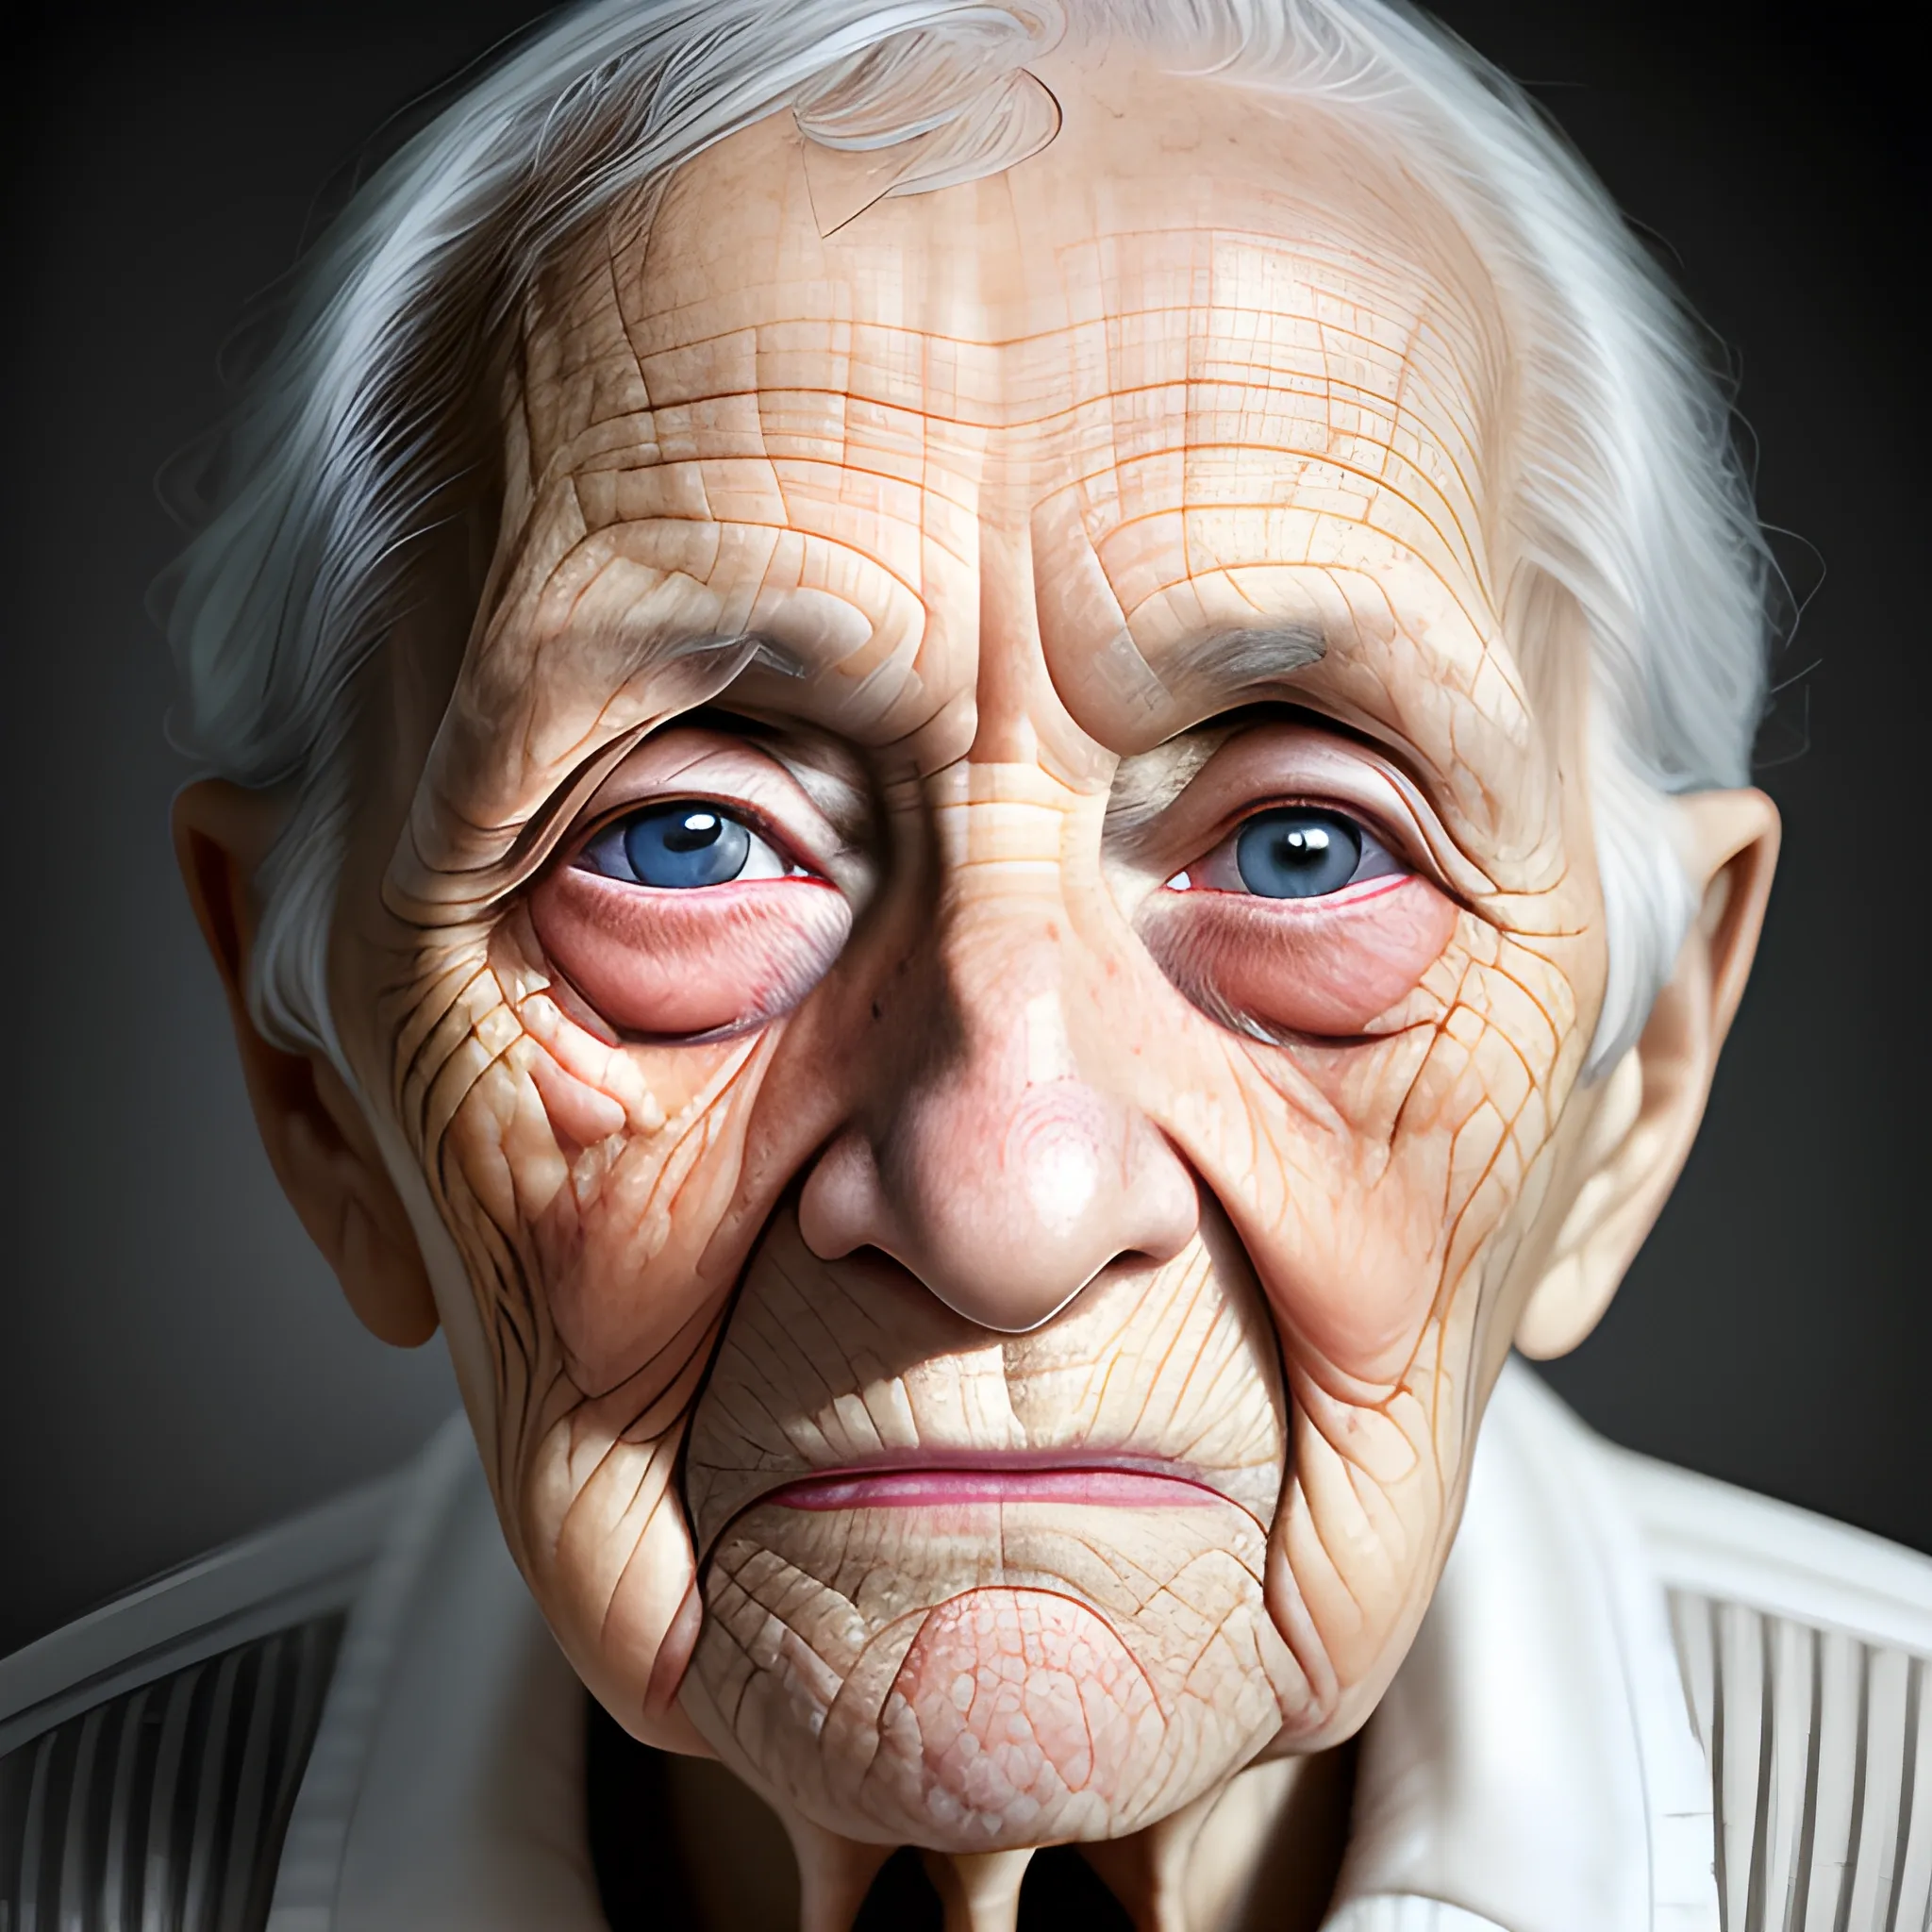 A powerful portrait of an elderly person, capturing the wrinkles ...